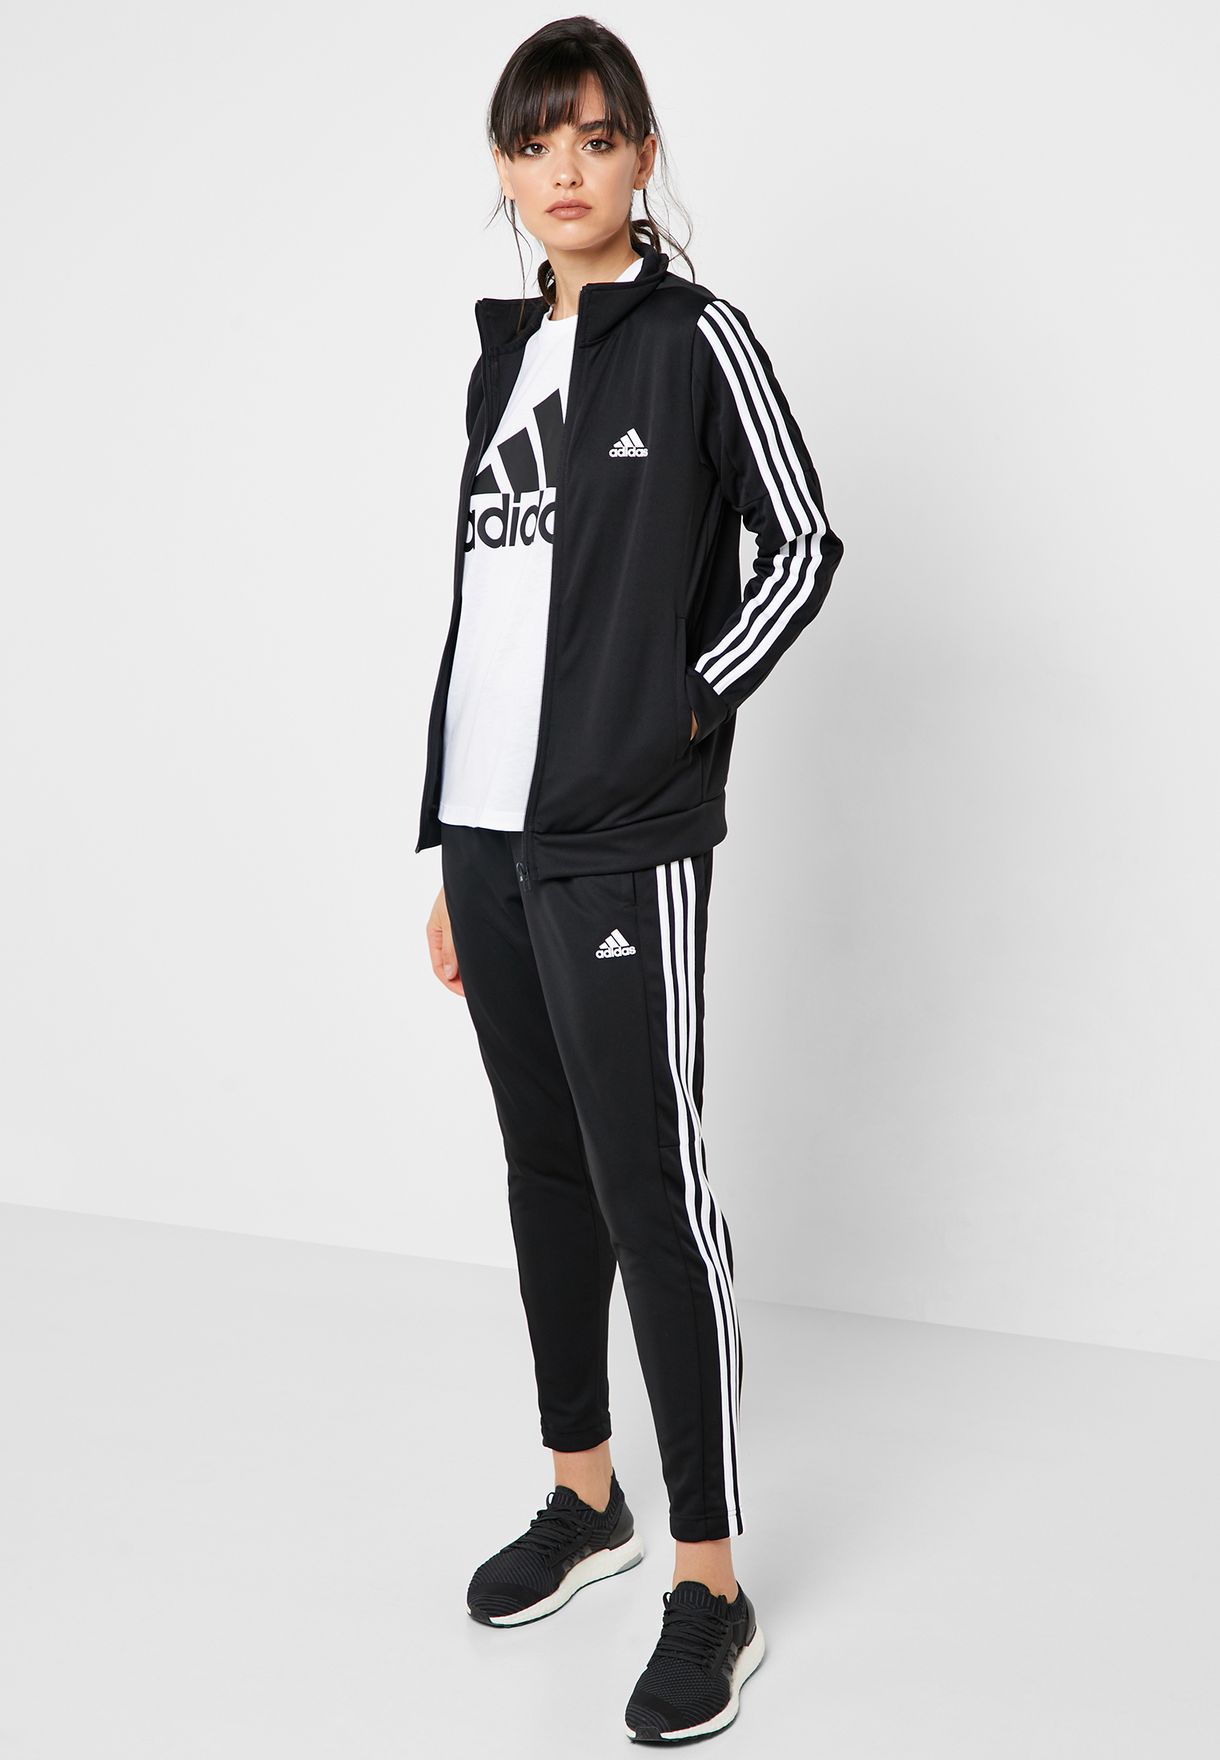 Buy > adidas team sports > in stock